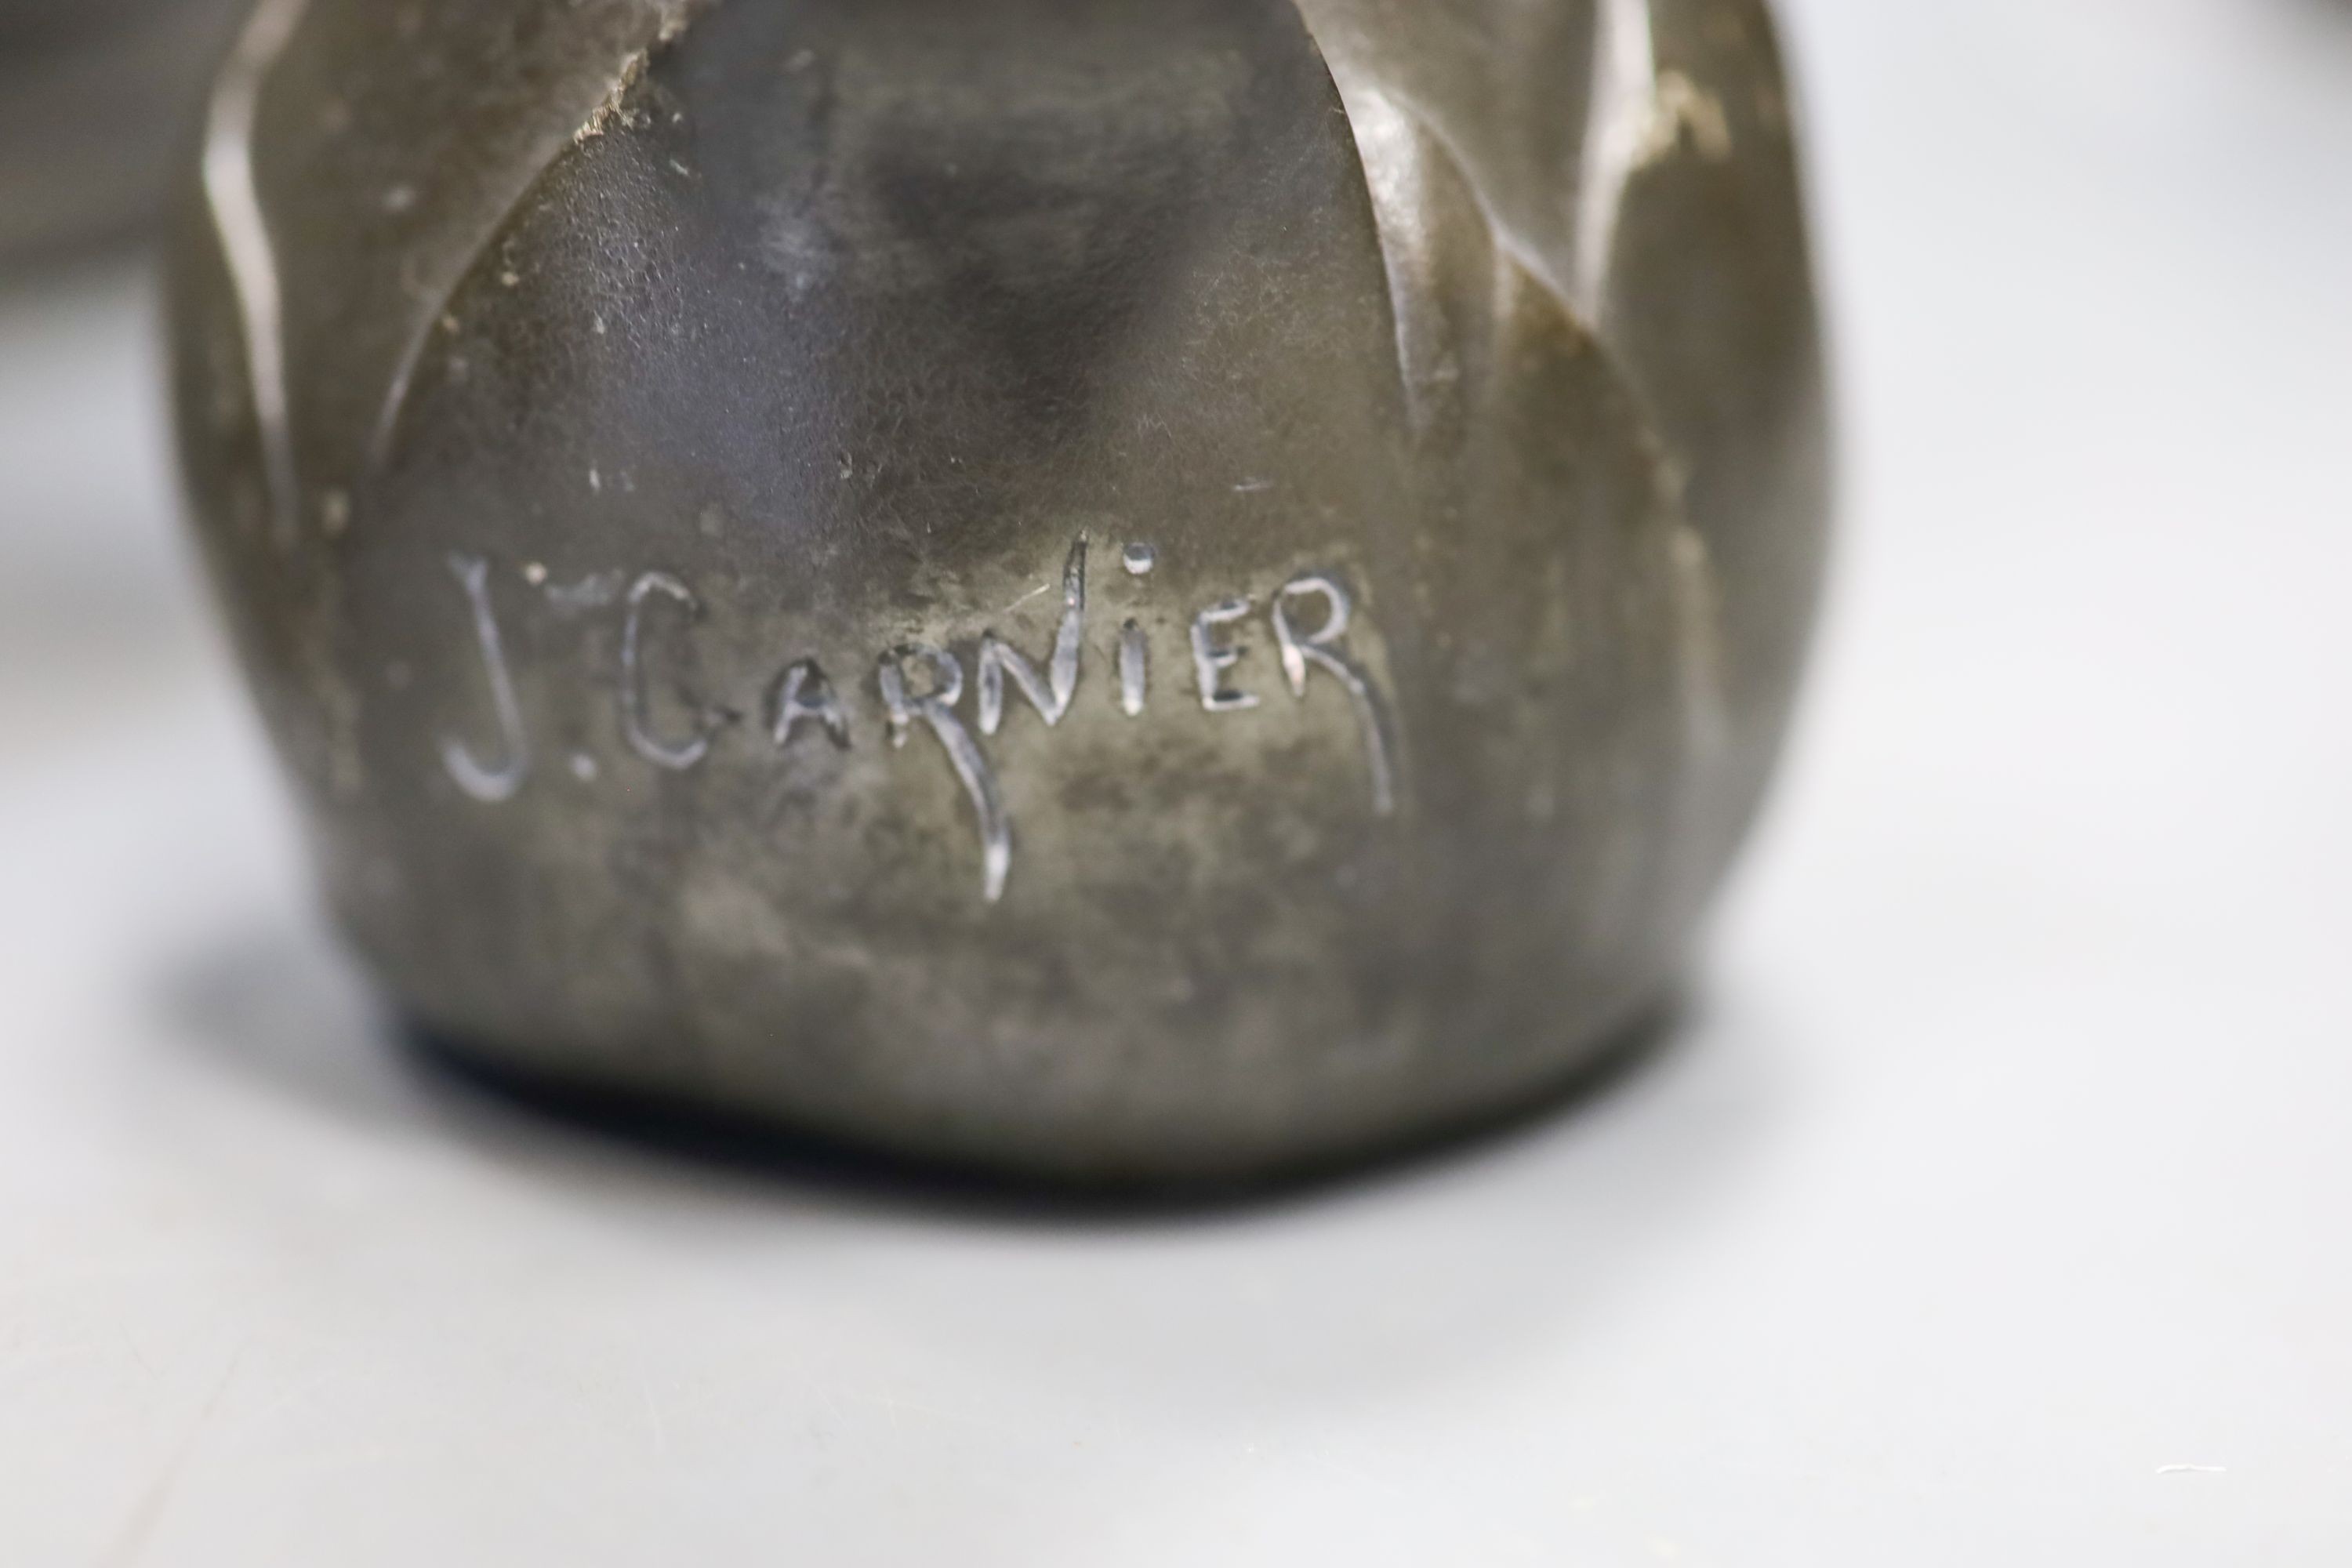 J Garnier - cast pewter jug in Art Nouveau style, Two Liberty's Tudric hammered pewter items and two other pewter wares